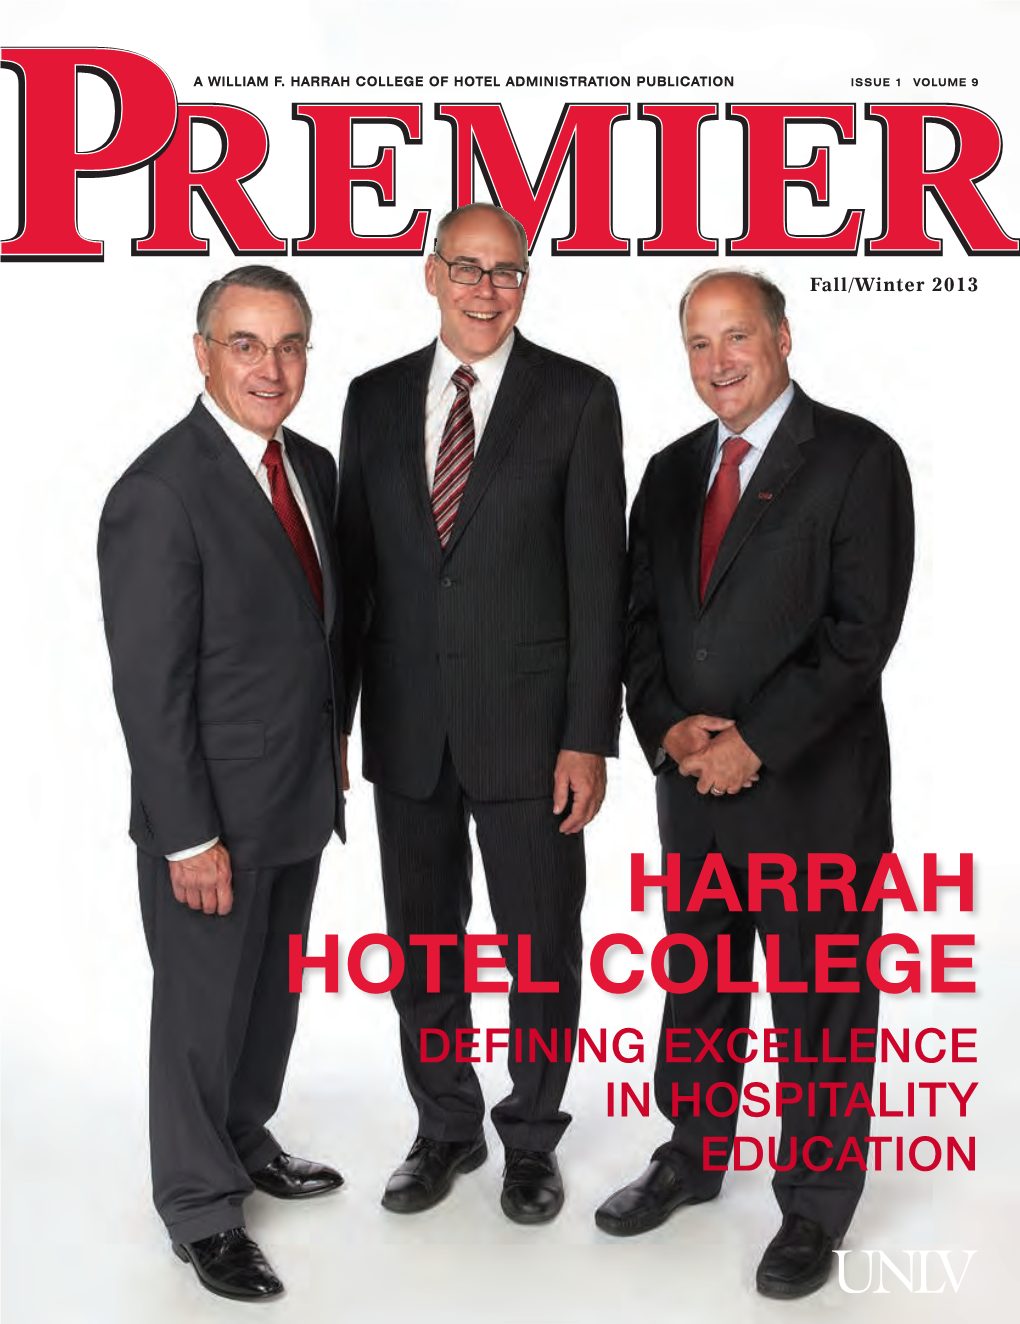 HARRAH HOTEL COLLEGE Defining Excellence in Hospitality Education Premier the Official Magazine of the William F